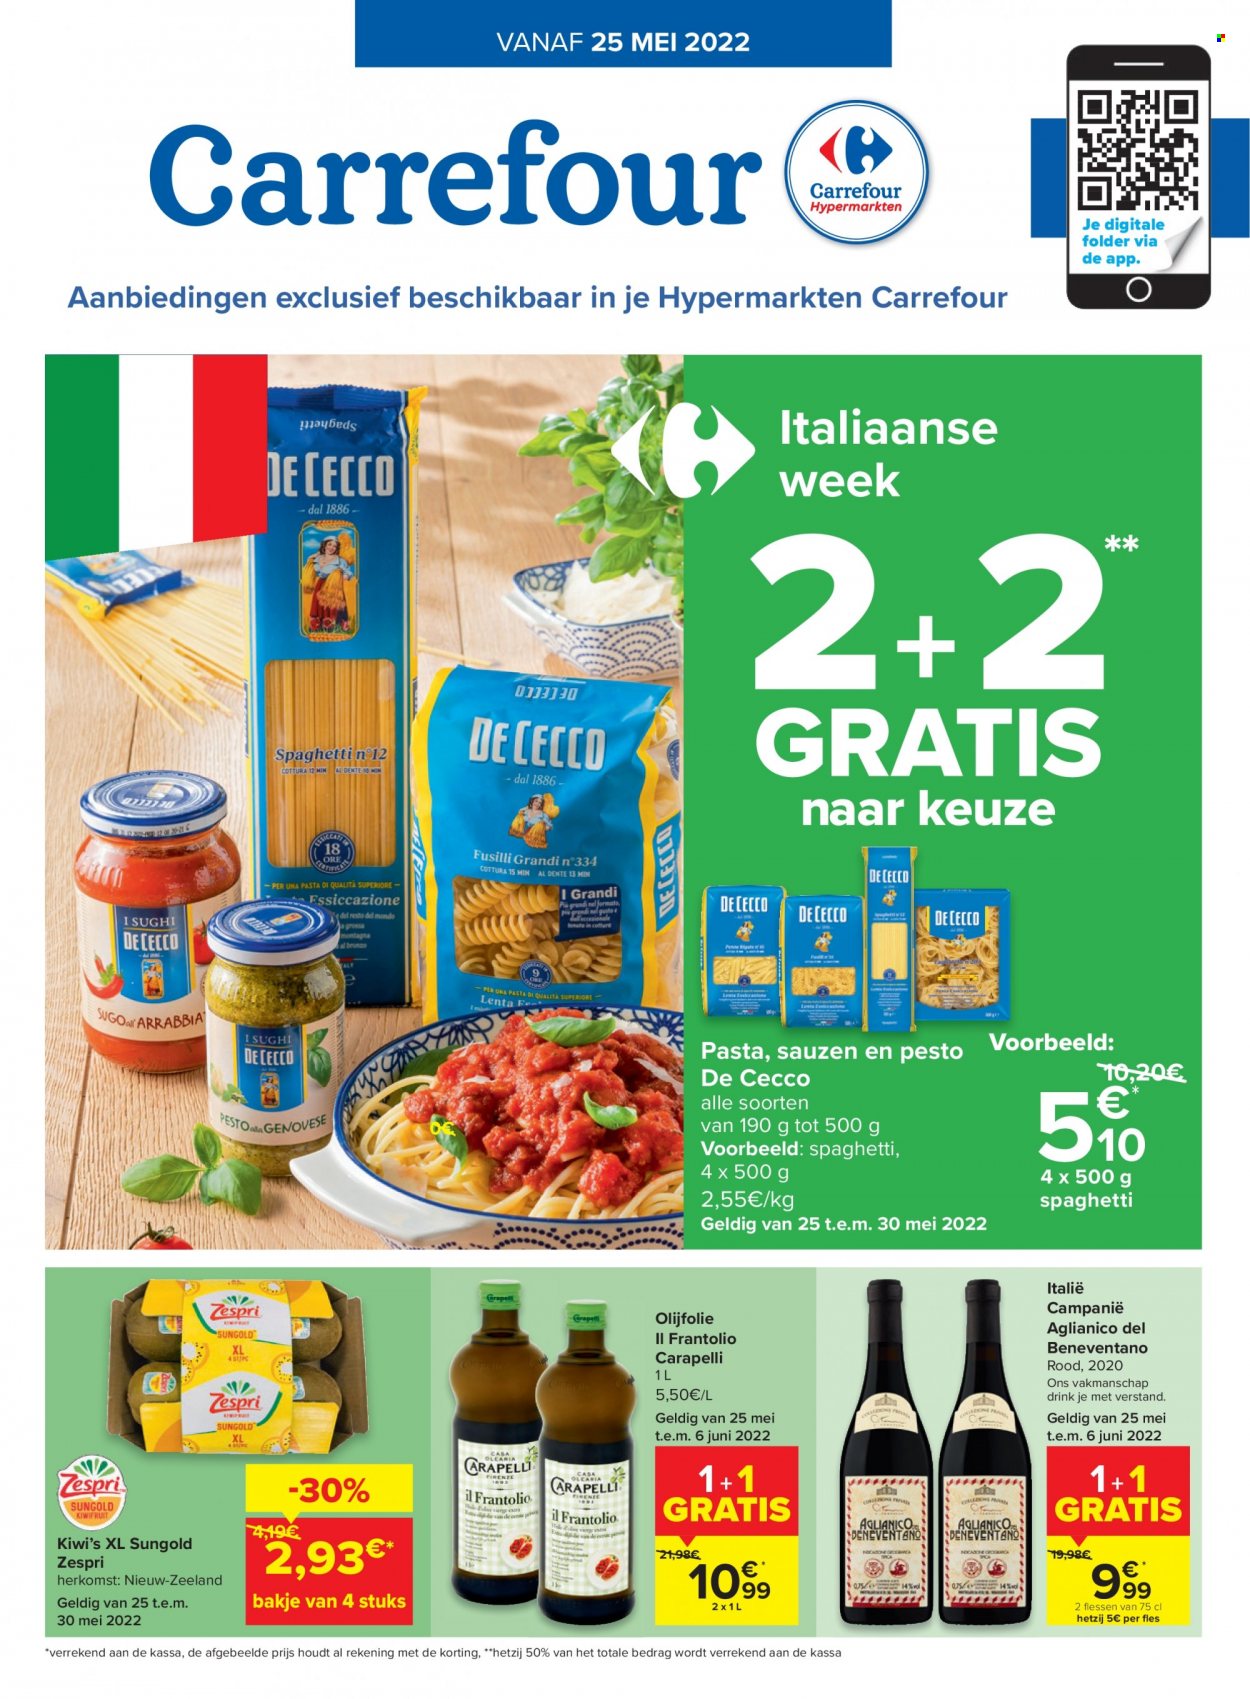 Catalogue Carrefour hypermarkt - 24.5.2022 - 30.5.2022. Page 1.